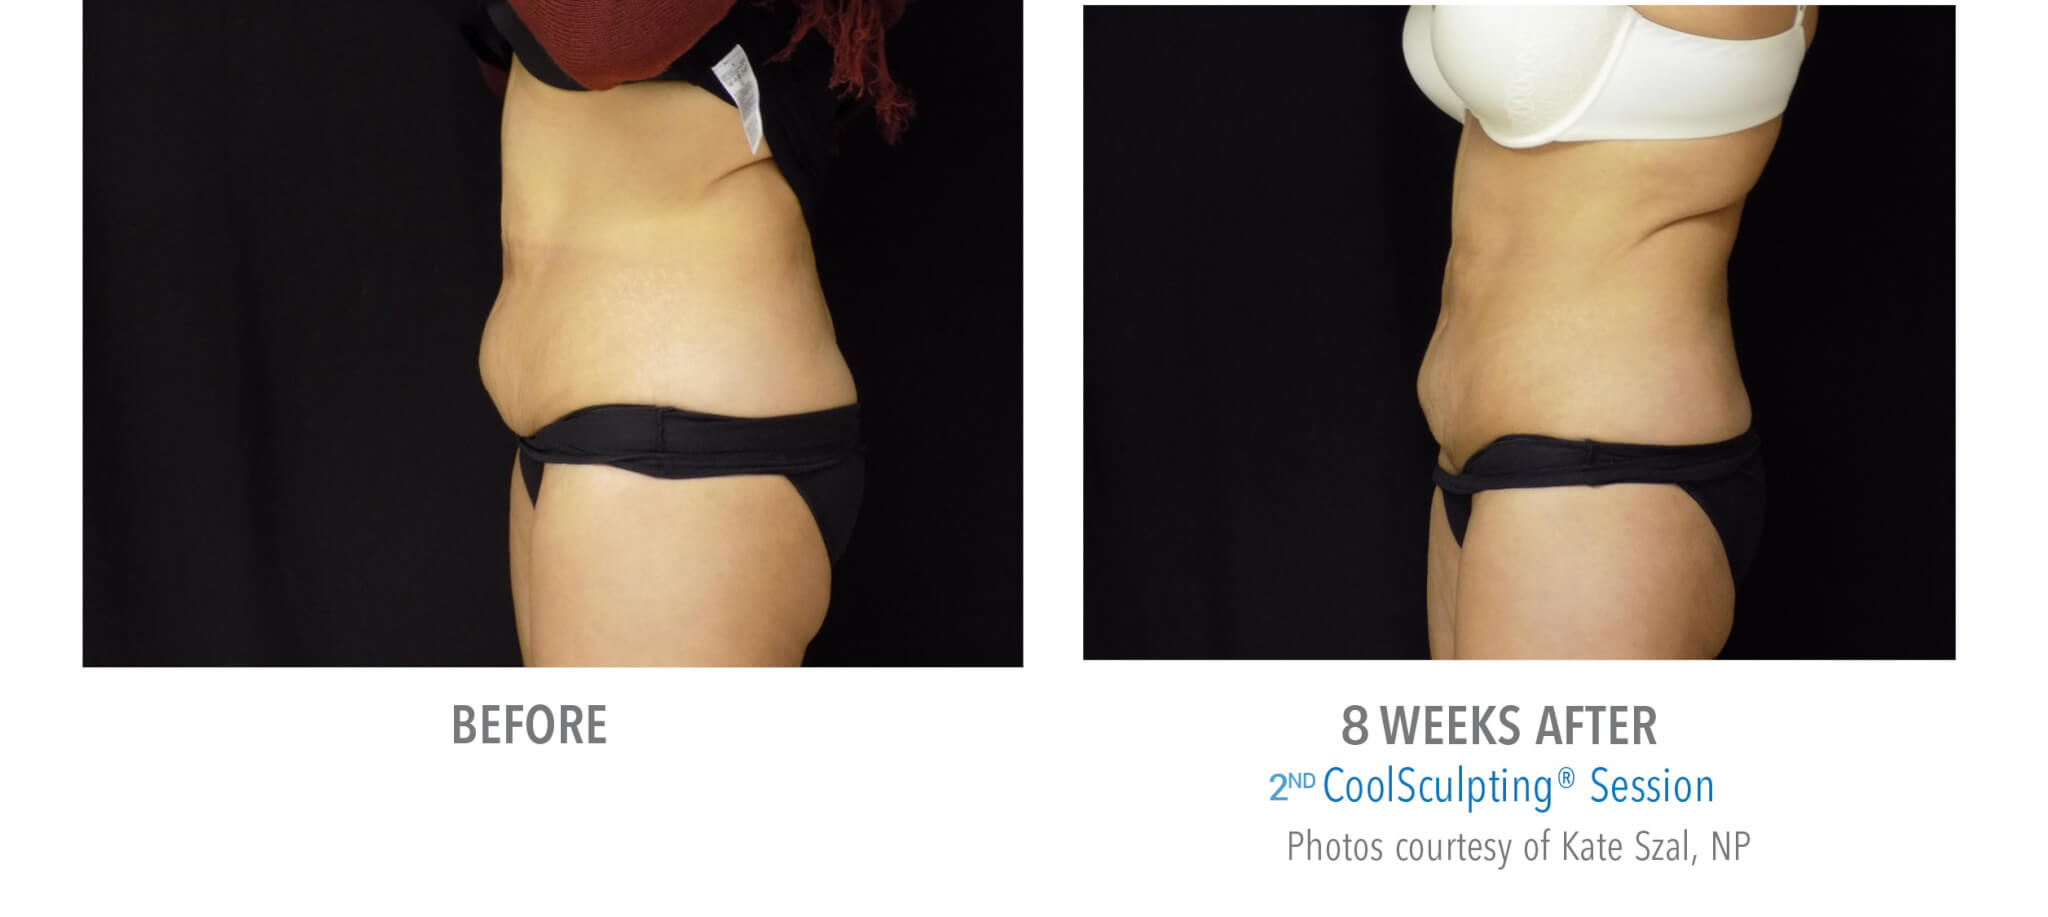 CS7 coolsculpting patient before and after